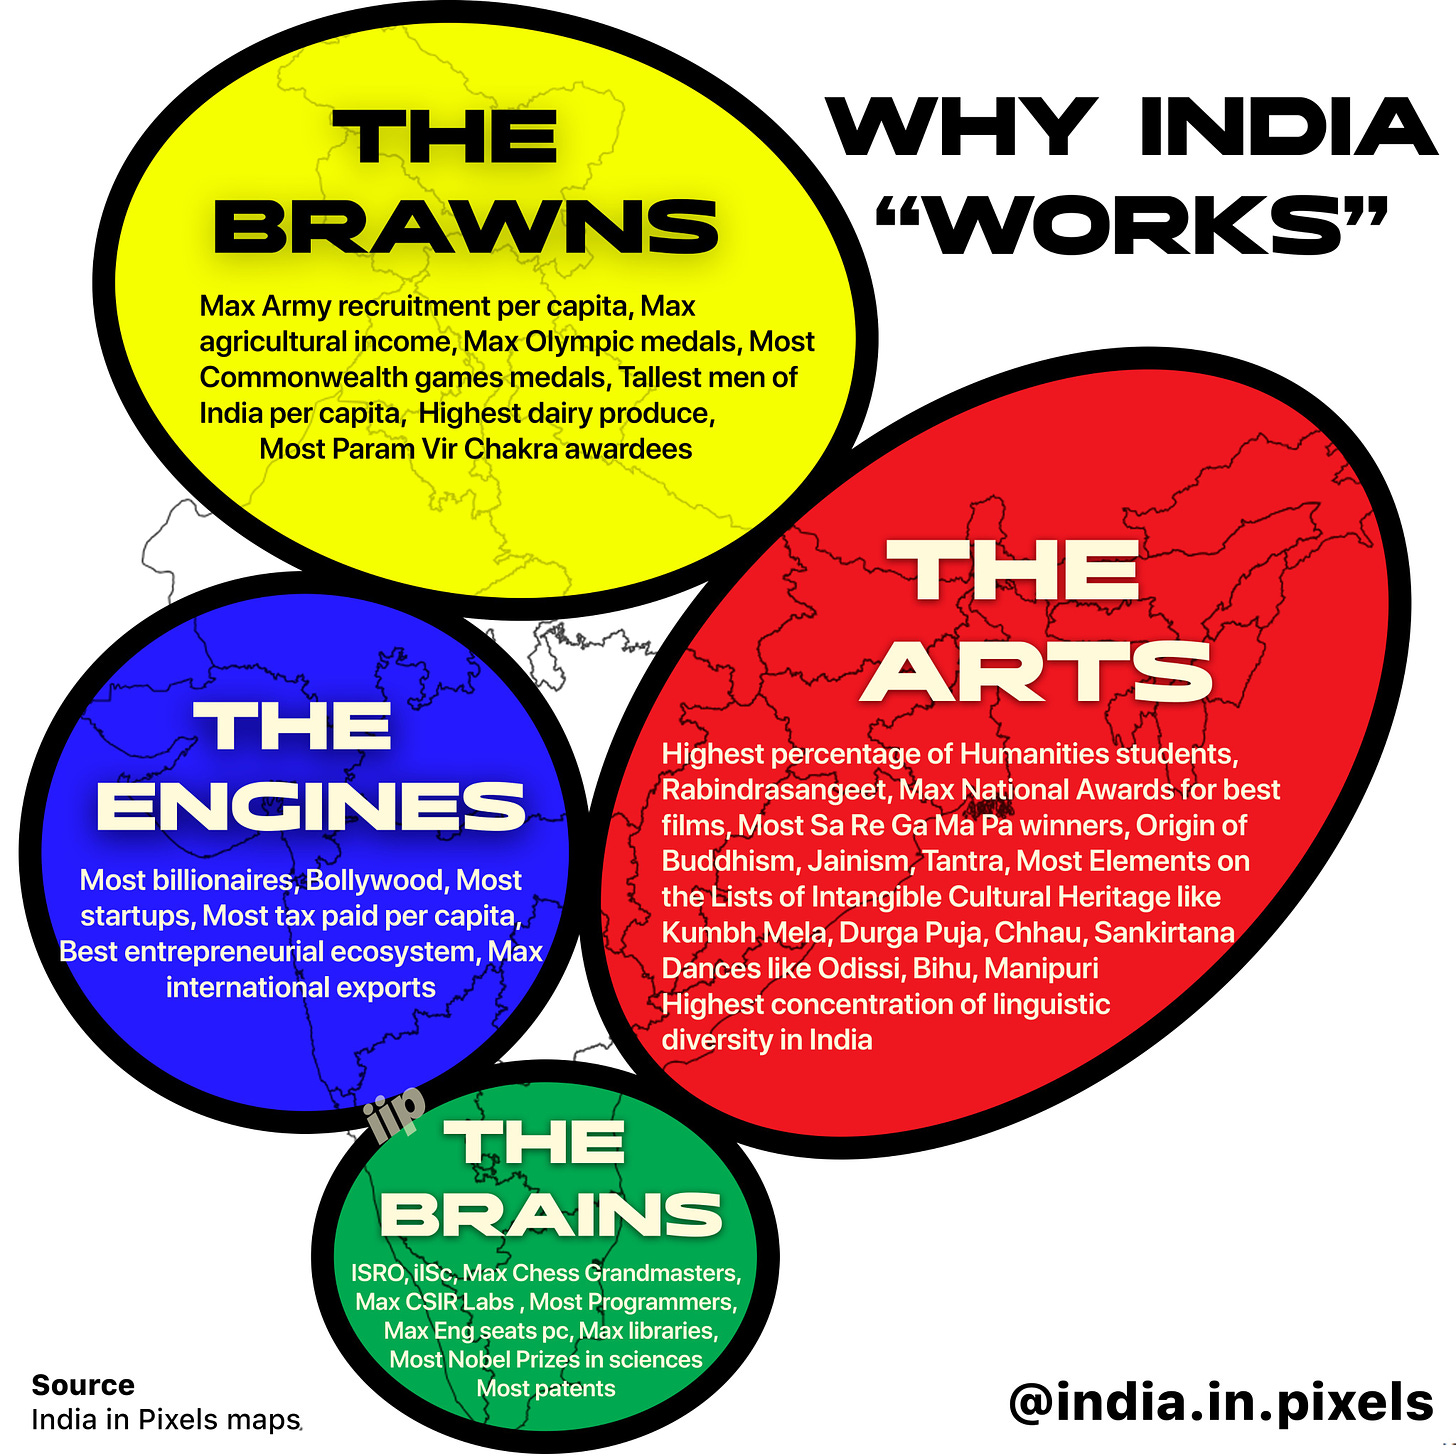 India in Pixels by Ashris on X: "Why India works? https://t.co/VLq1Alc1ob"  / X